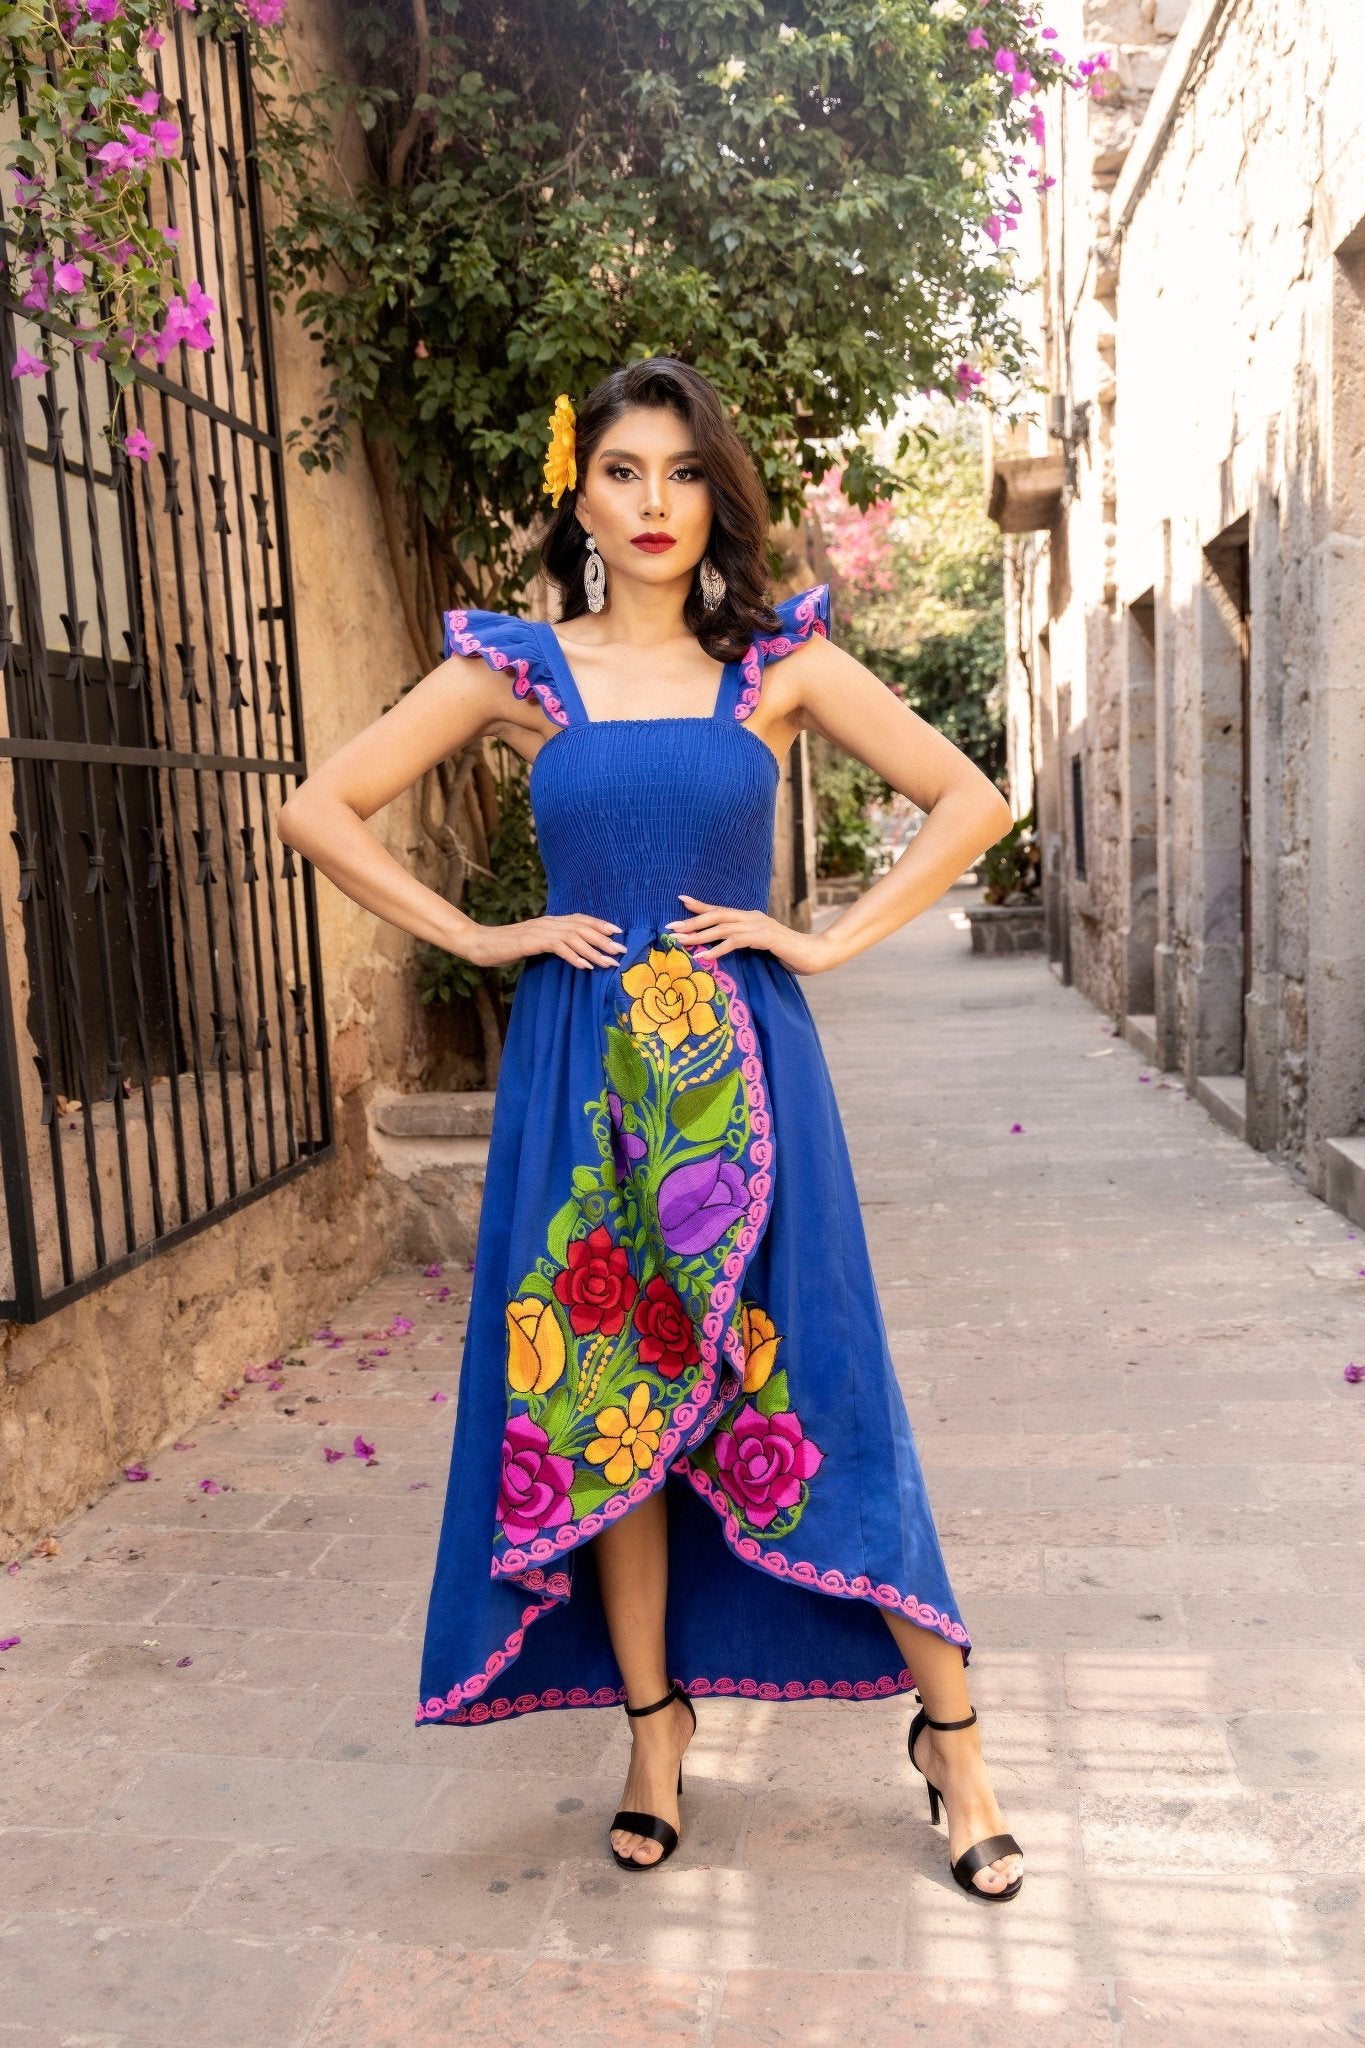 Floral Embroidered High-Low Mexican Dress in Royal Blue with multicolor embroidery